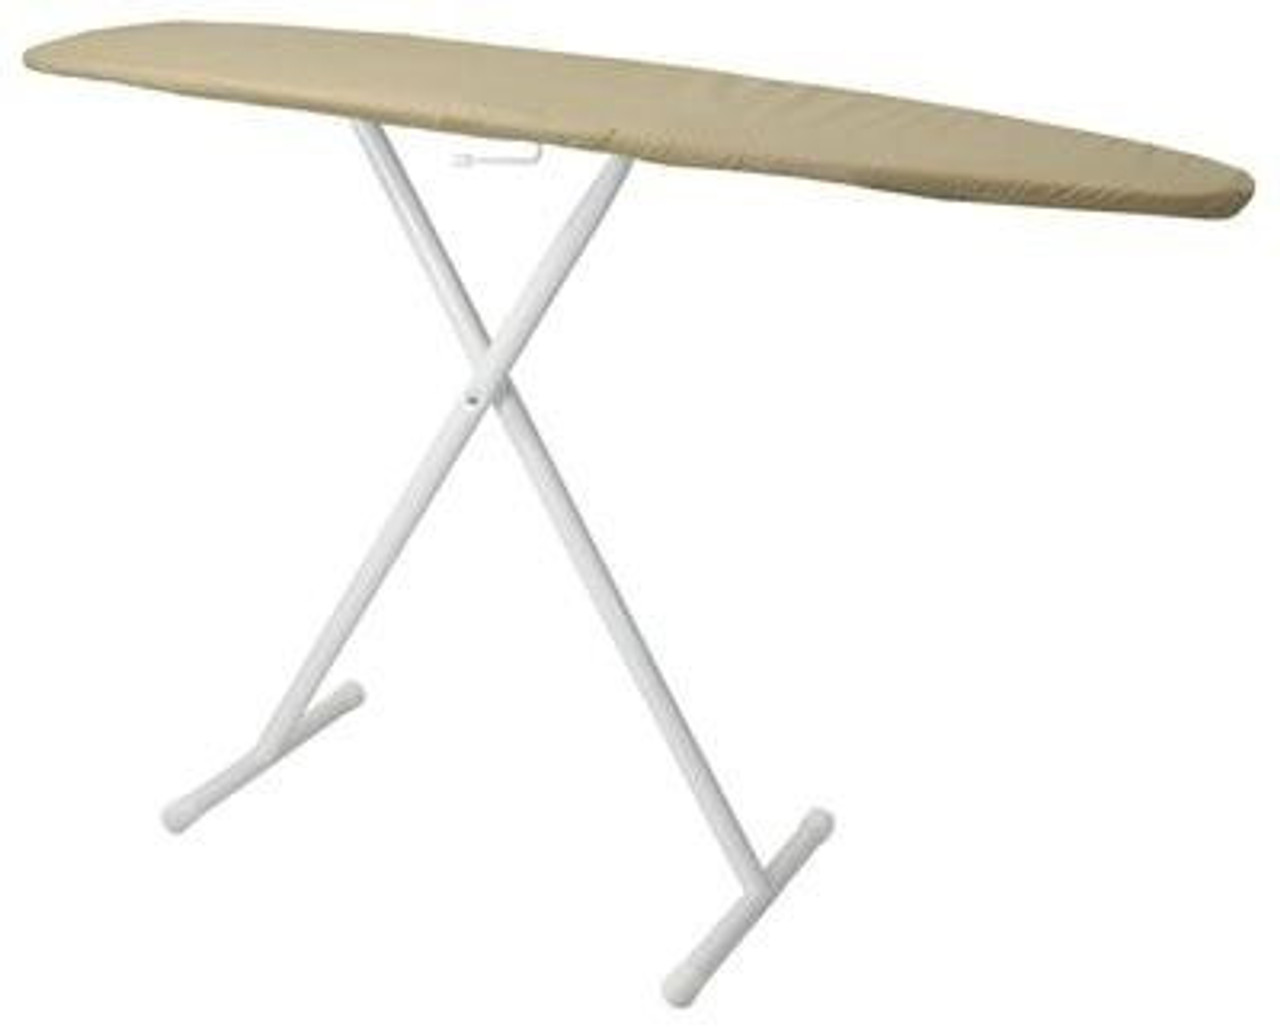 HOSPITALITY 1 SOURCE HOSPITALITY 1 SOURCE or ESSENTIAL IRONING BOARD